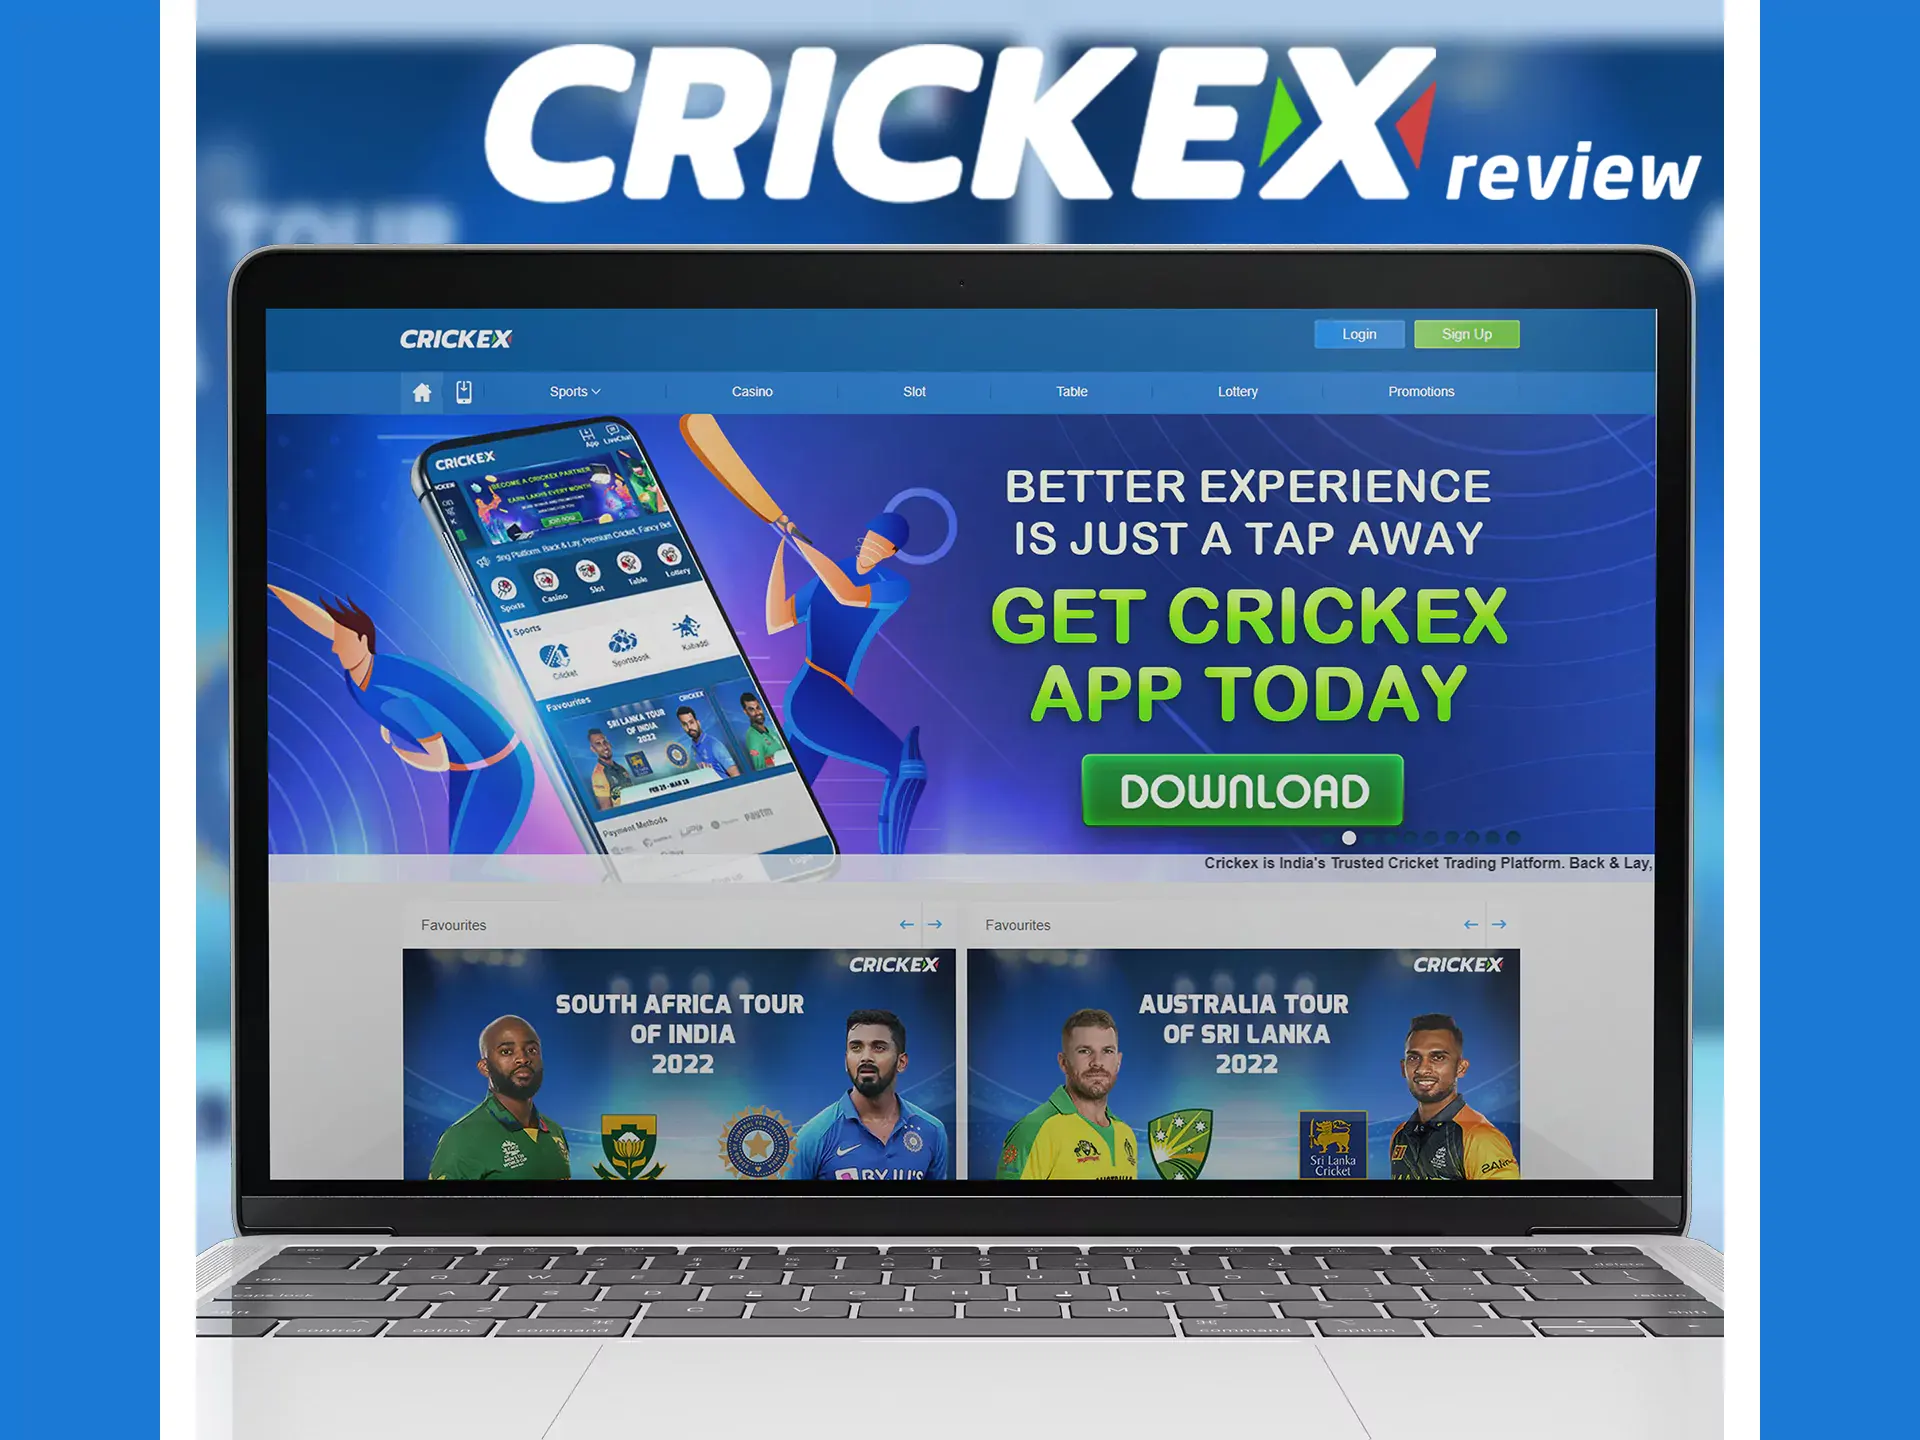 The mobile version of the Crickex site is similar to the app.